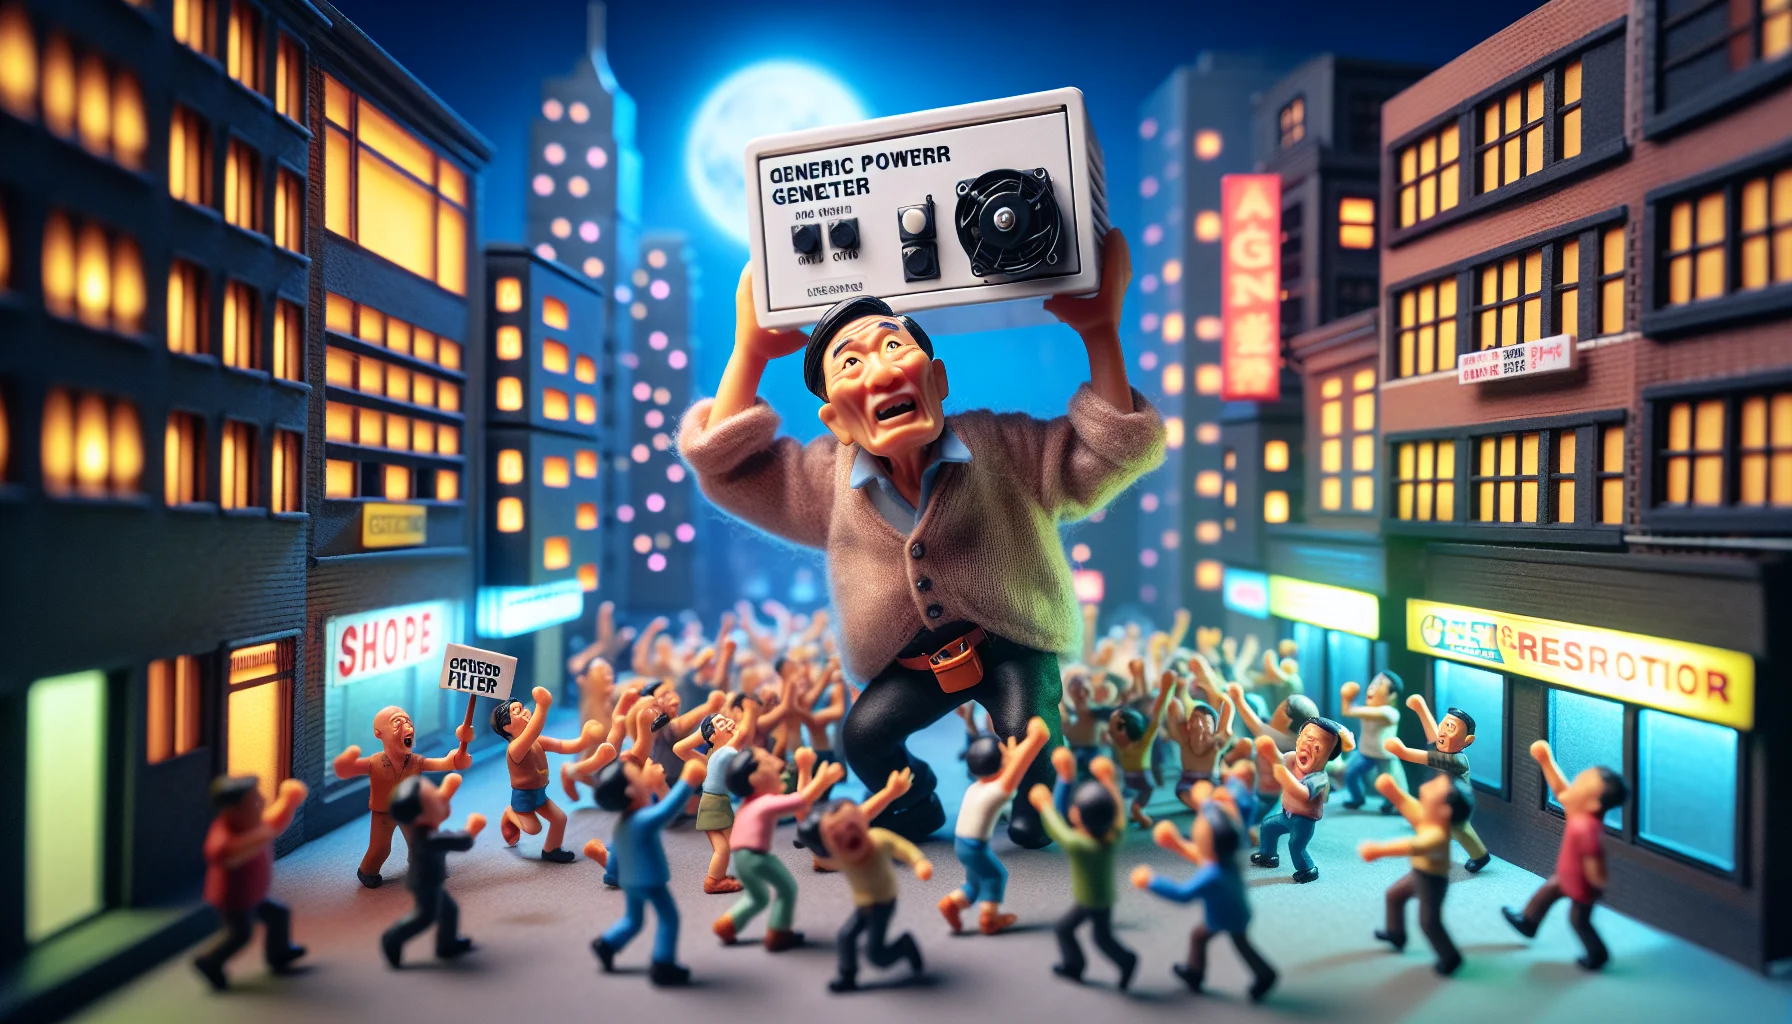 A humorous scenario showcasing a generic power generator's filter: Imagine a miniature cityscape lit up with neon lights, evoking a lively night-time atmosphere. Suddenly, a power outage sweeps across the city, causing everything to go dark. Panicked, the tiny city-dwellers run around in confusion. However, relief washes over them as one of the citizens, an elderly Asian man with a humorous expression and a tool belt, steps forward. He holds up a gleaming power generator's filter like a prized possession. The crowd shares a laugh, lifts him onto their shoulders, and cheers excitedly, eager to restore electricity to their city once again.